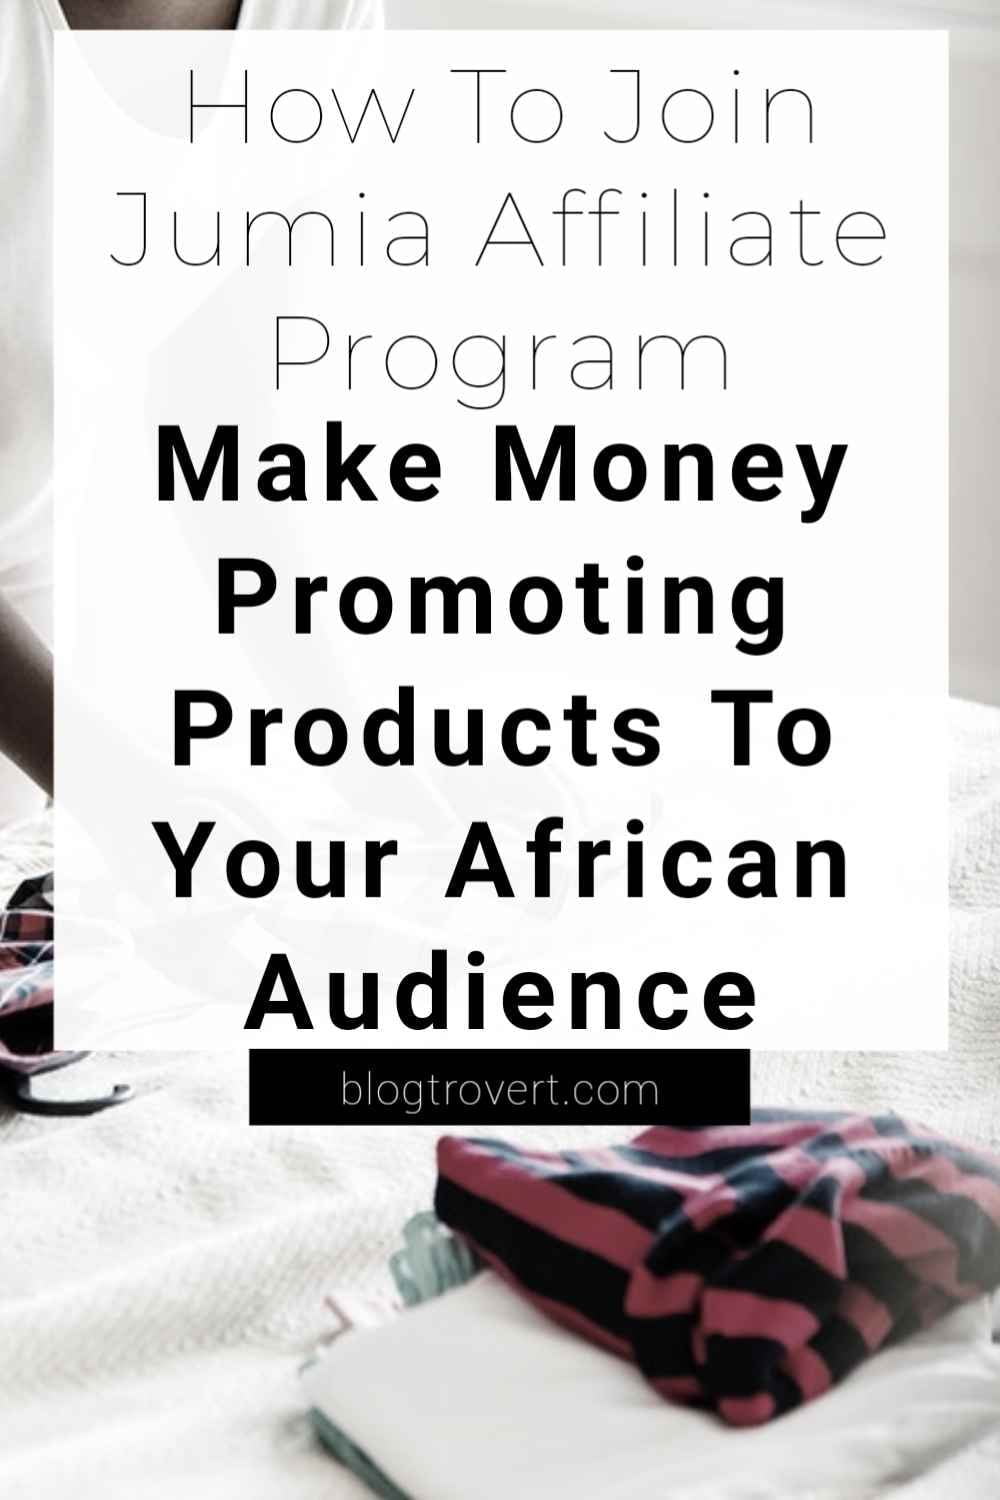 How To Join The Jumia Affiliate Program - Get Paid To Promote Products 1